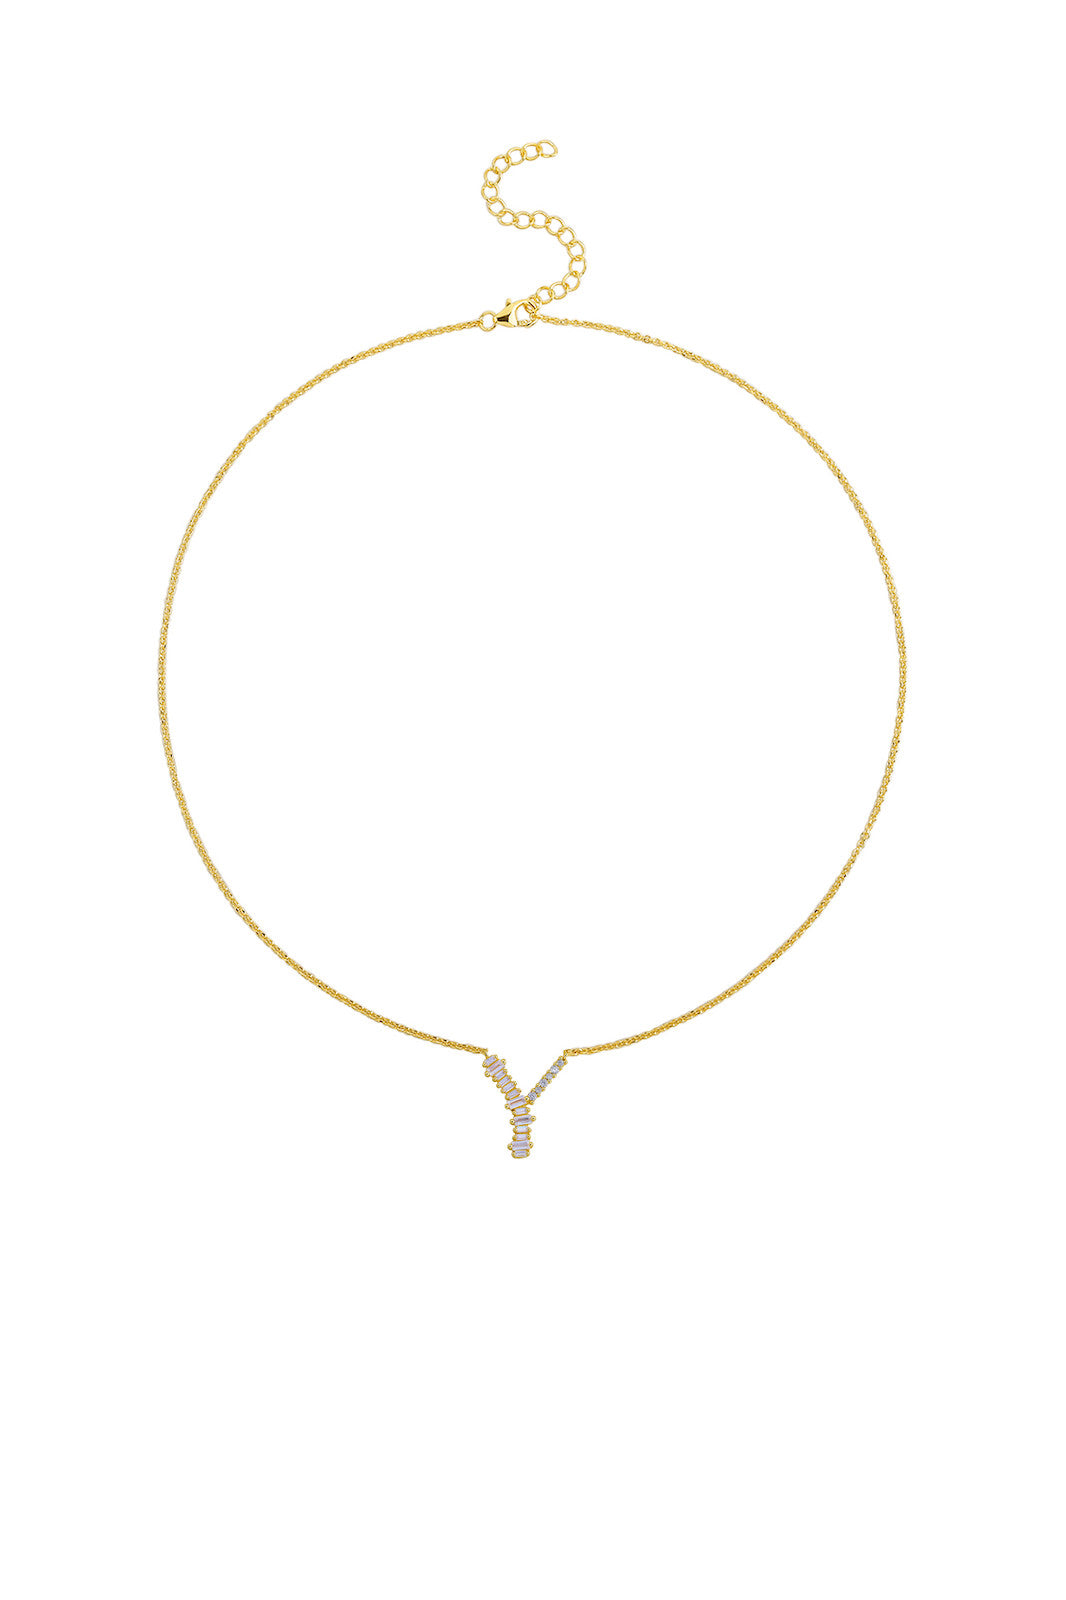 Gold Plated Sterling Silver Initial Necklace - Letter Y Detail